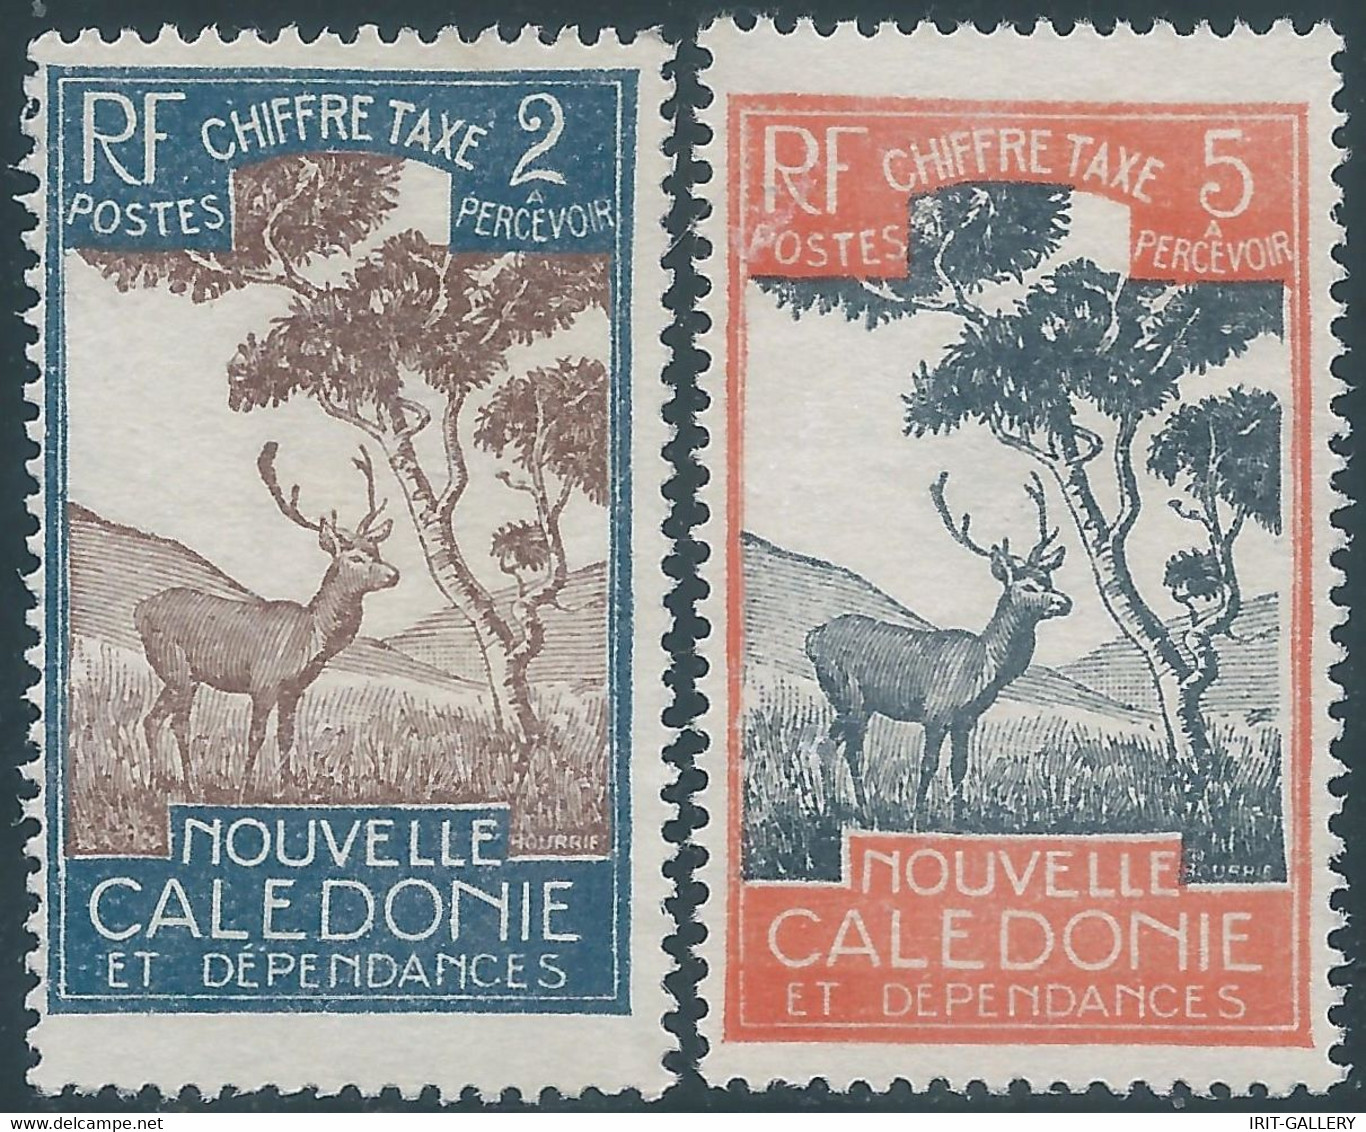 FRANCE,Calédonie - New Caledonia,1920 CHIFFER TAXE,Revenue Stamps Fiscal Tax,2 & 5F,Mint - Timbres-taxe